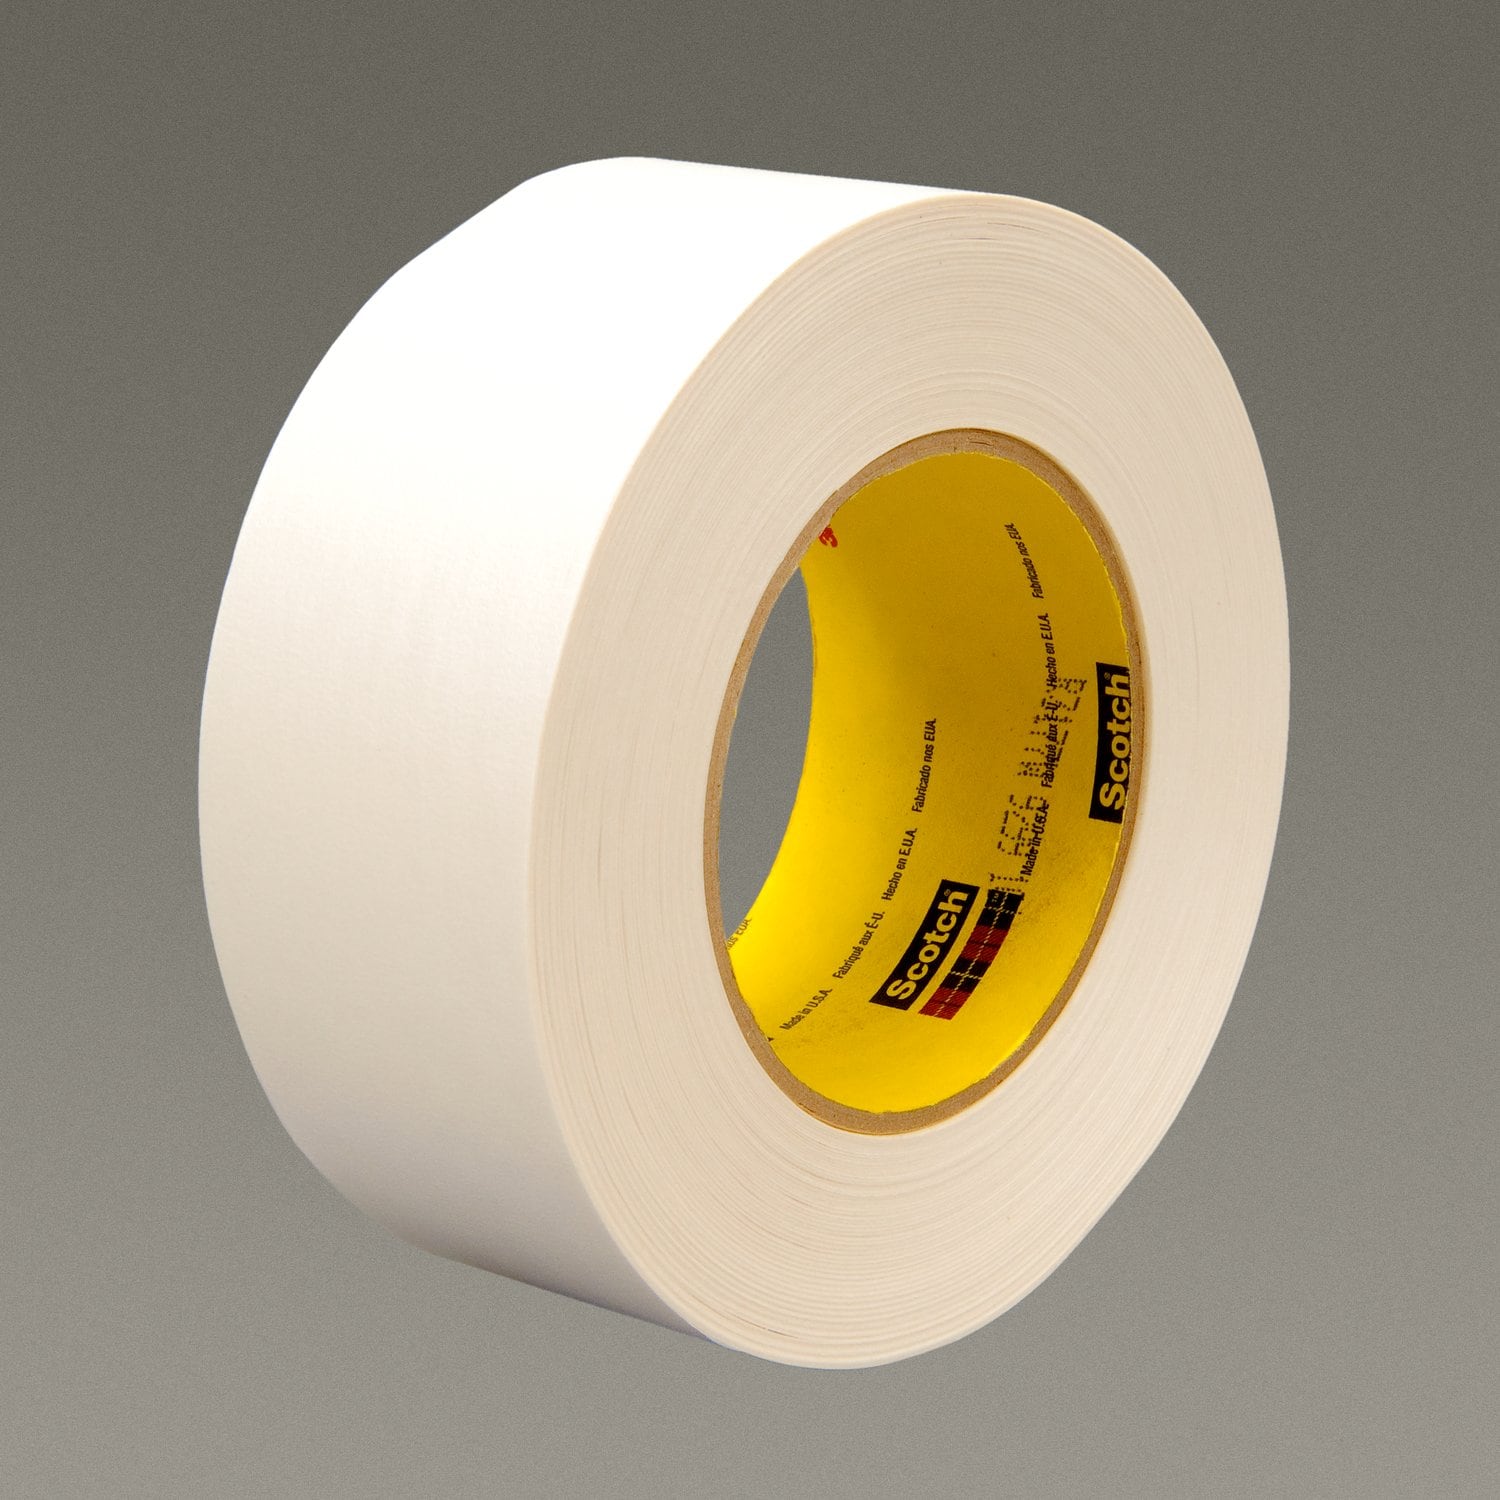 7100132962 - 3M Repulpable Super Strength Single Coated Tape R3177, White, 7 mil,
Roll, Config